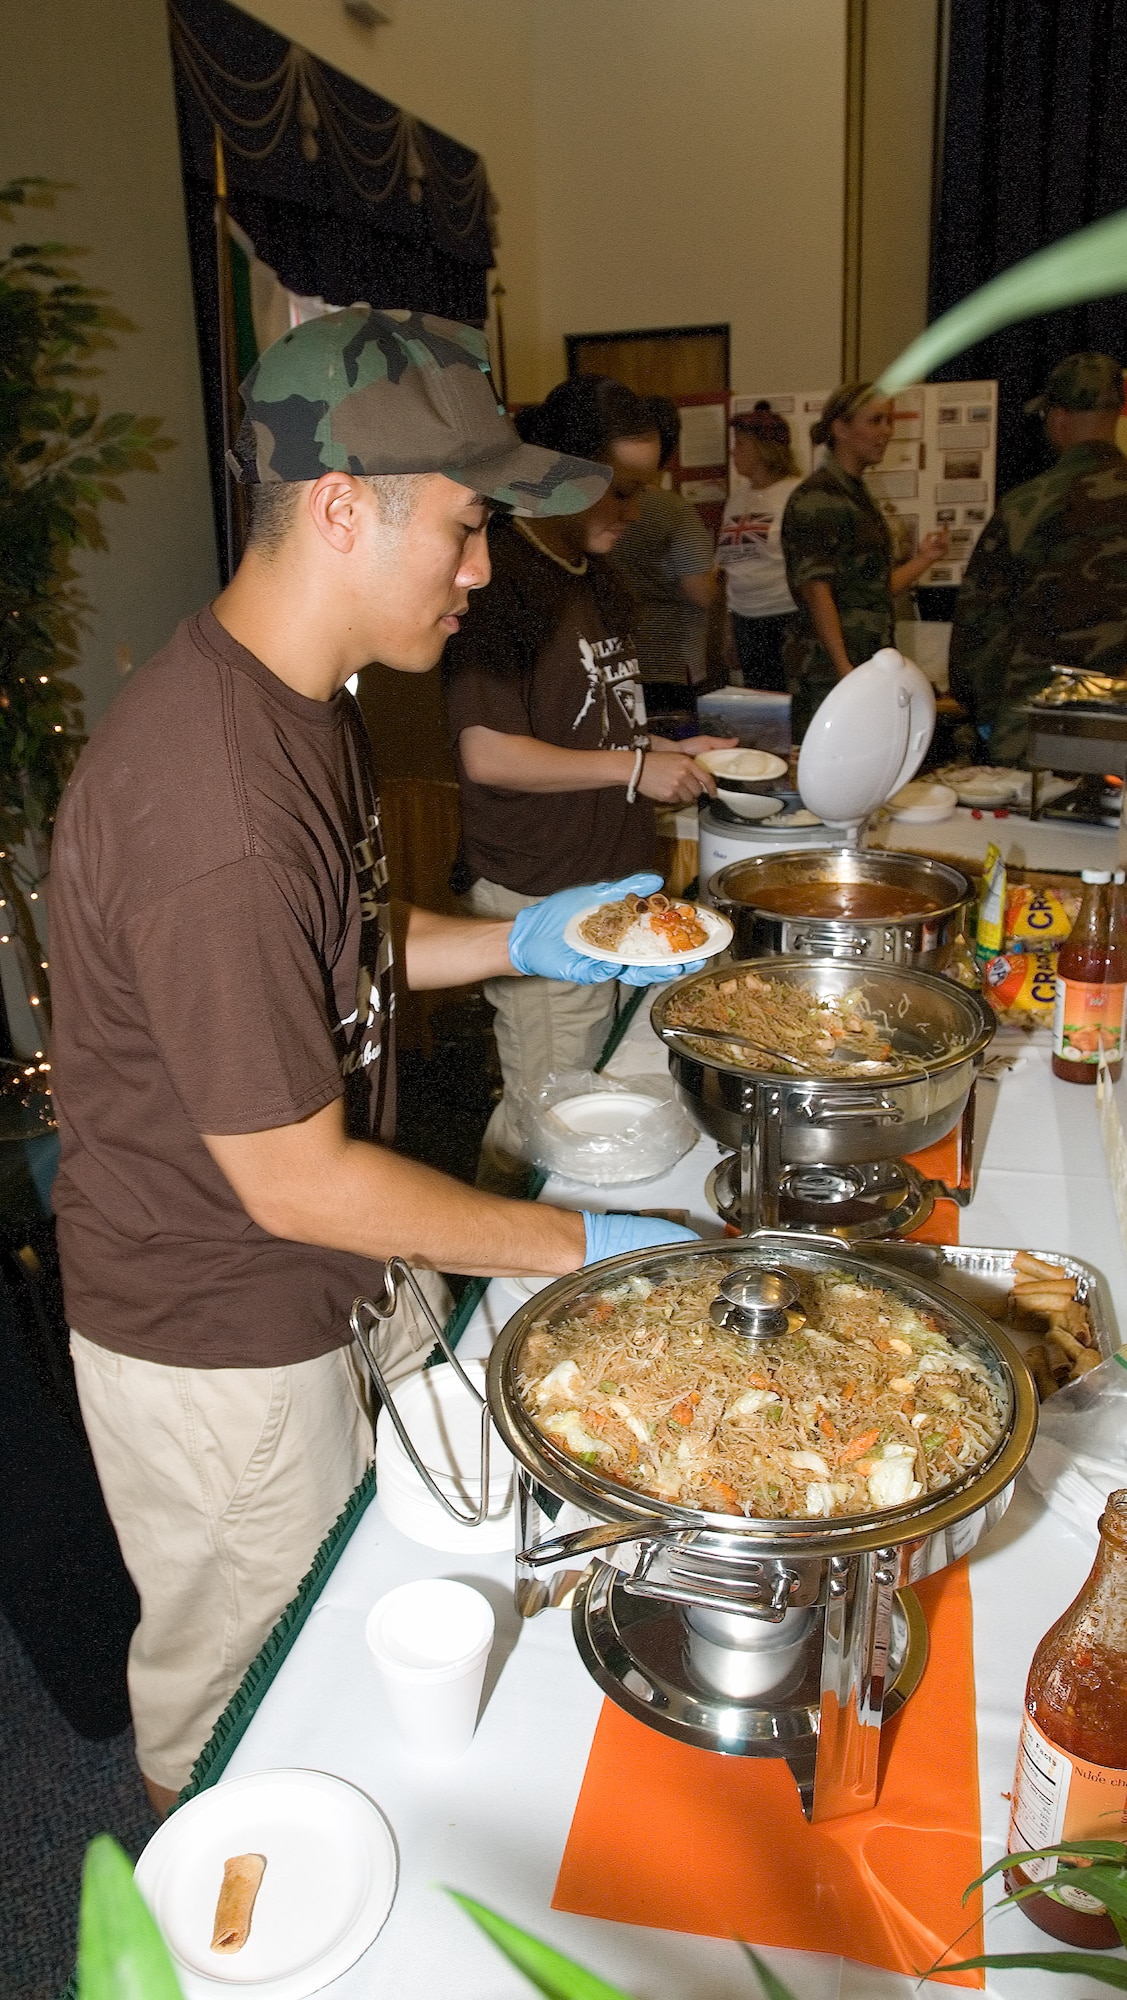 Staff Sgt. Angelo Dumanhog, 436th Logistics Readiness Squadron, cooks a Filipino cuisine at the Philippines booth during Dover's 2006 Multi-Cultural Expo at The Landings Club June 23. (U.S. Air Force photo by Jason Minto)